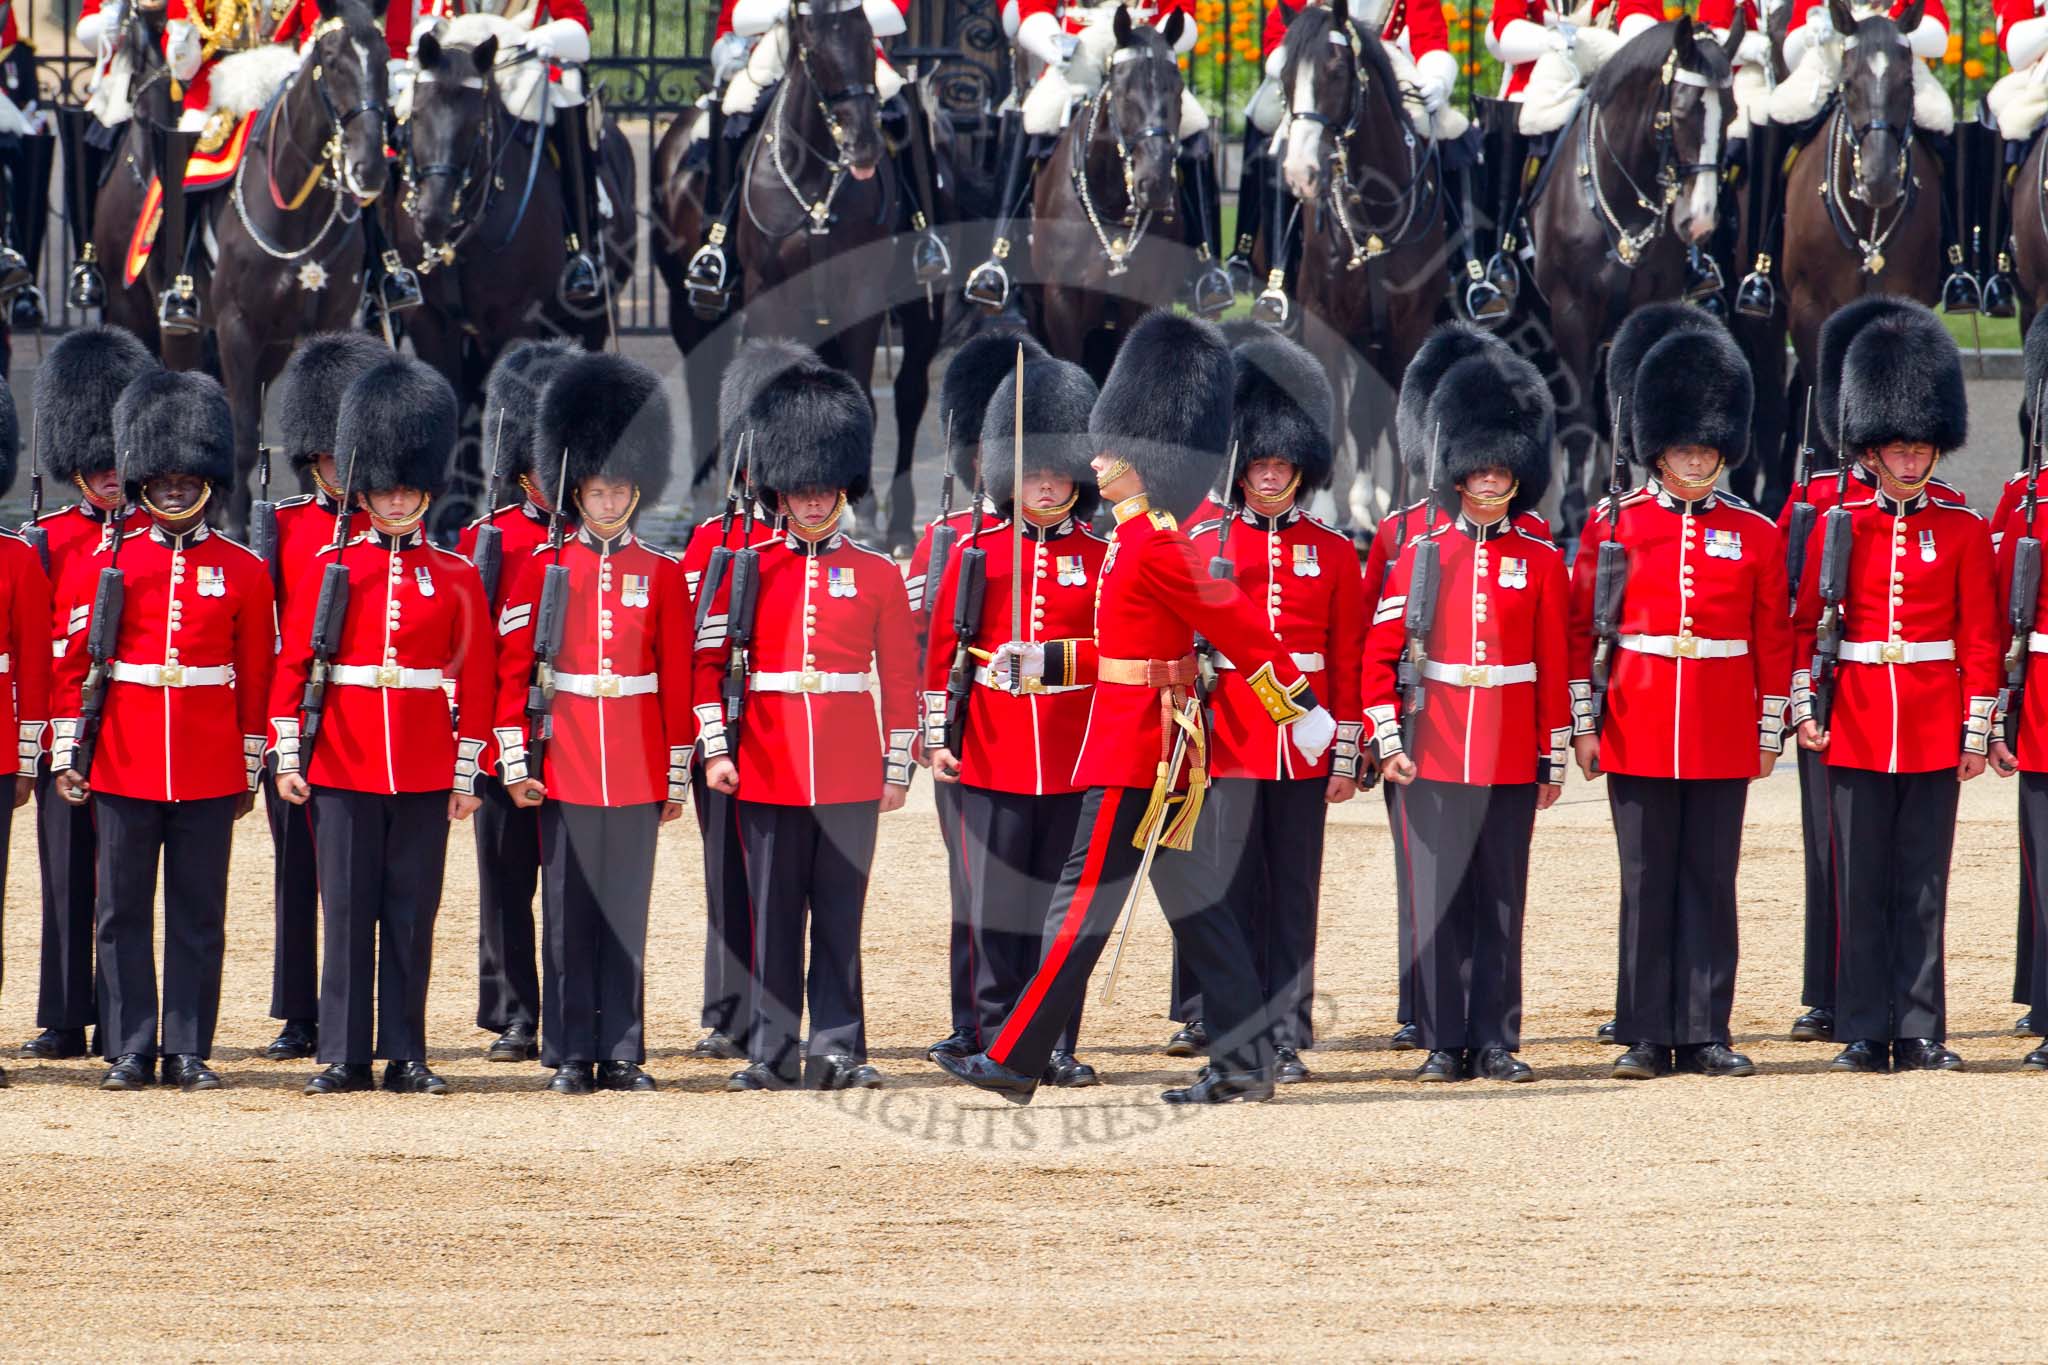 Trooping the Colour 2011: No. 2 Guard, B Company Scots Guards, during the March Past in slow time. In front, marching past the line of guardsmen, Lieutenant S E Kershaw..
Horse Guards Parade, Westminster,
London SW1,
Greater London,
United Kingdom,
on 11 June 2011 at 11:52, image #308